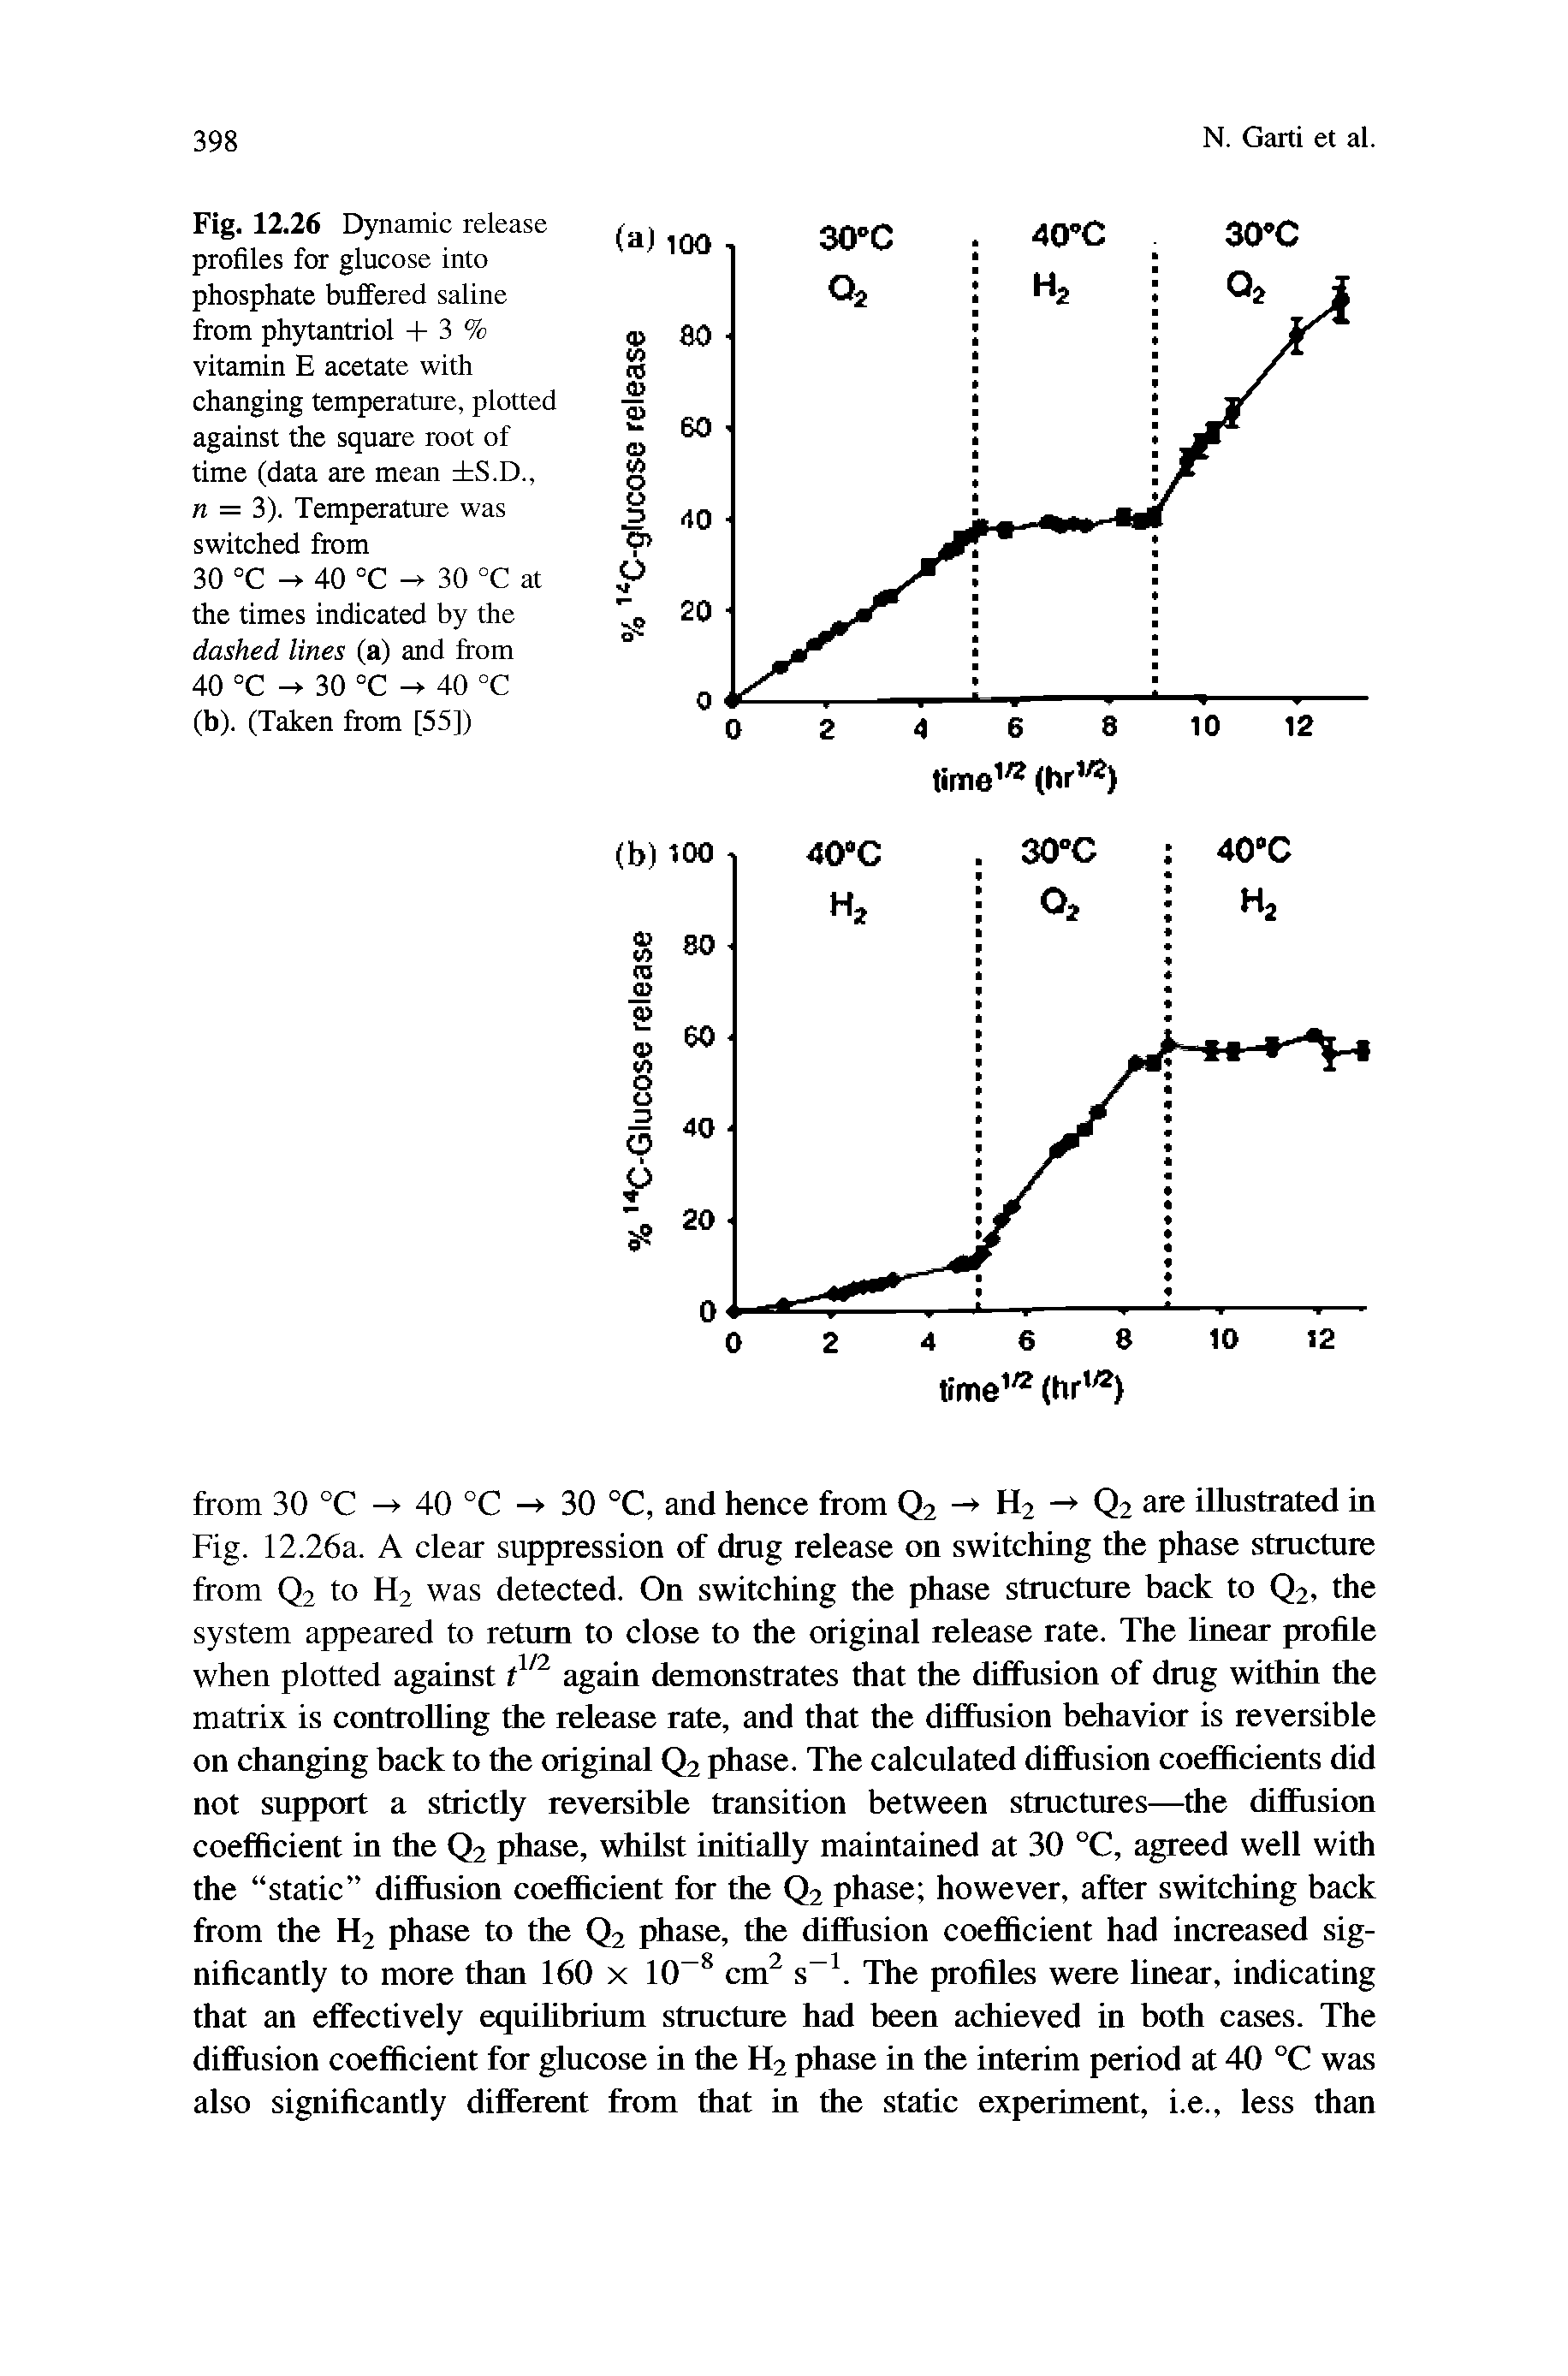 Fig. 12.26 Dynamic release profiles for glucose into phosphate buffered saline from phytantriol + 3 % vitamin E acetate with changing temperature, plotted against the square root of time (data are mean S.D., n = 3). Temperature was switched from 30 °C - 40 °C 30 °C at the times indicated by the dashed lines (a) and from 40 °C 30 °C -> 40 °C (b). (Taken from [55])...